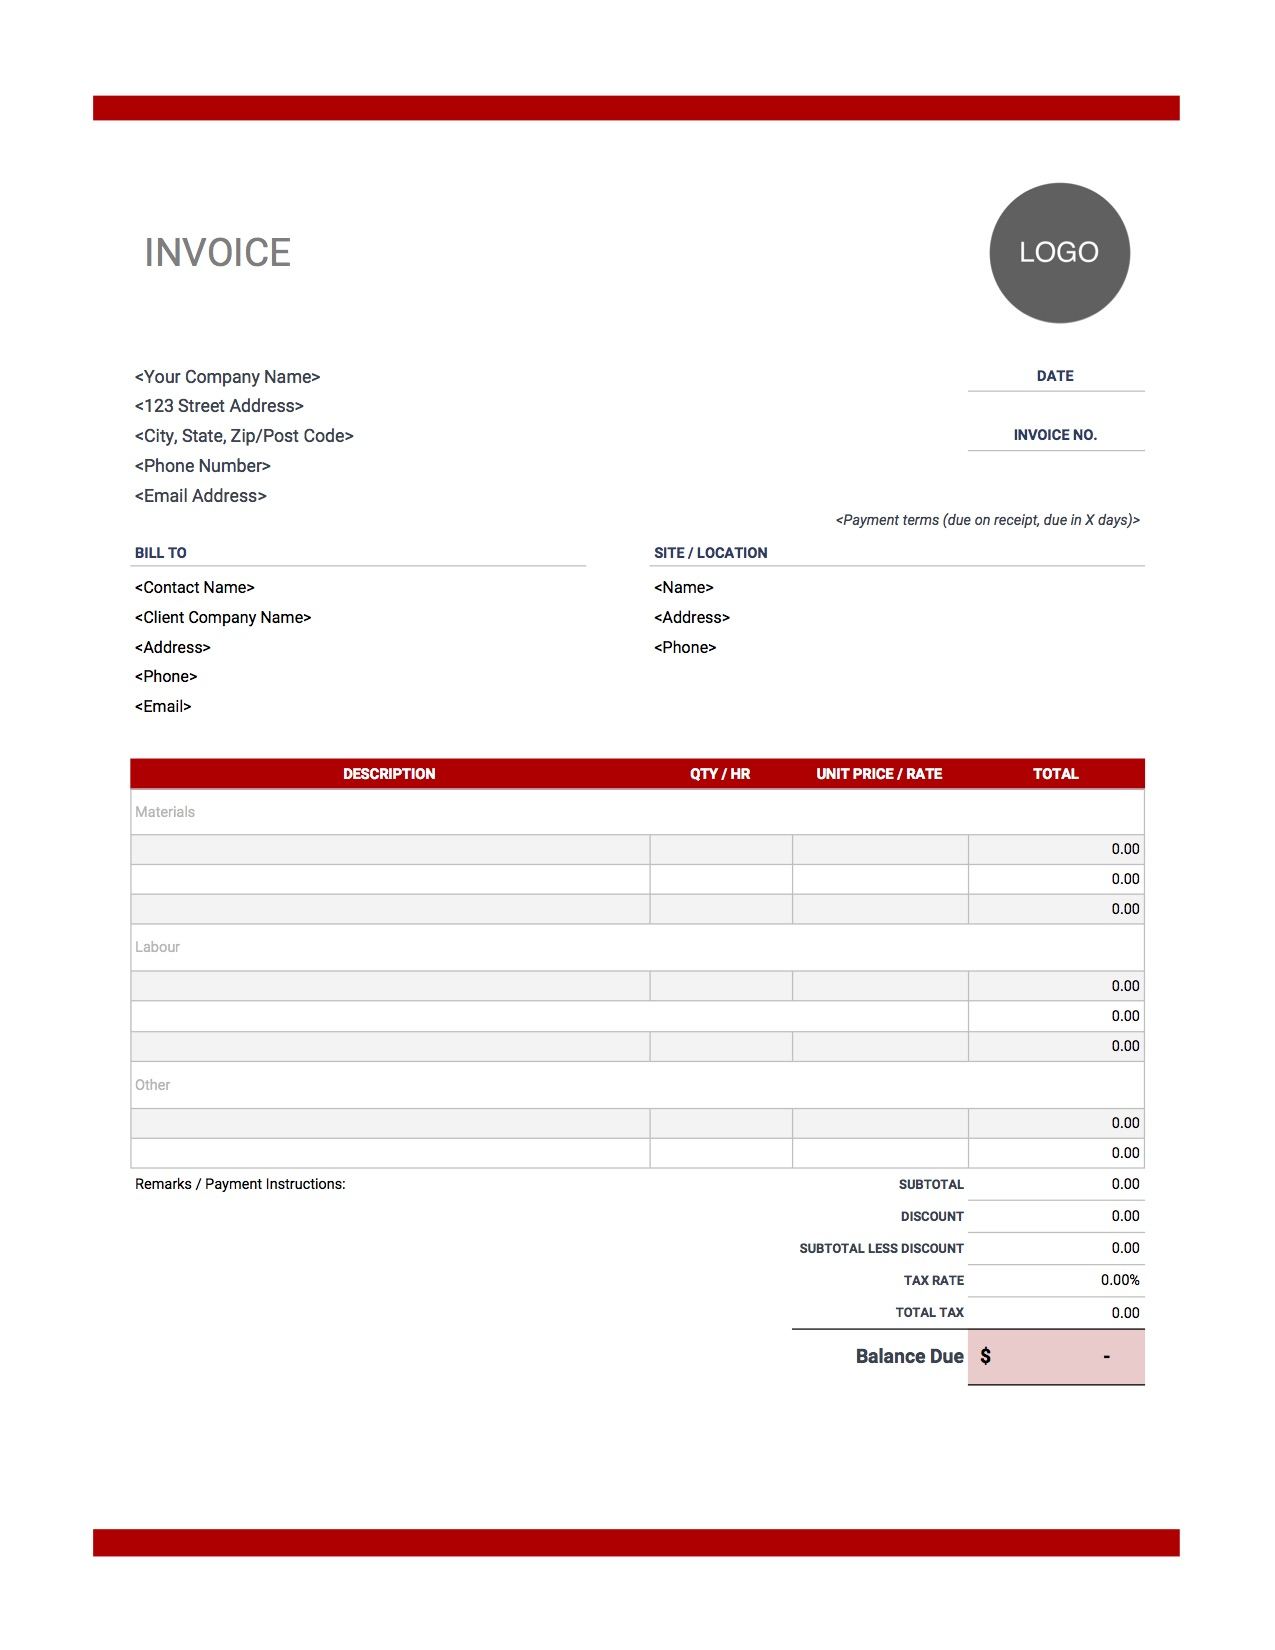 100% free simple invoice template